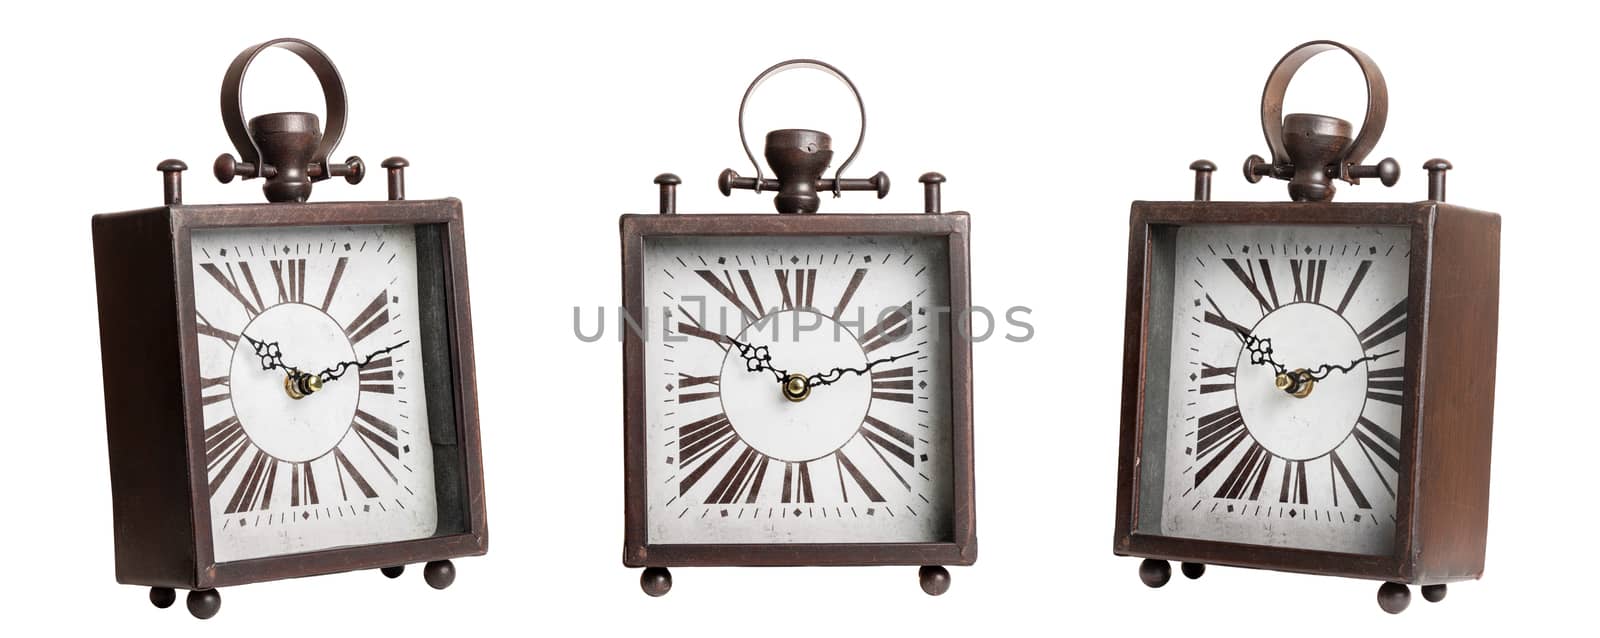 classic style clock by norgal